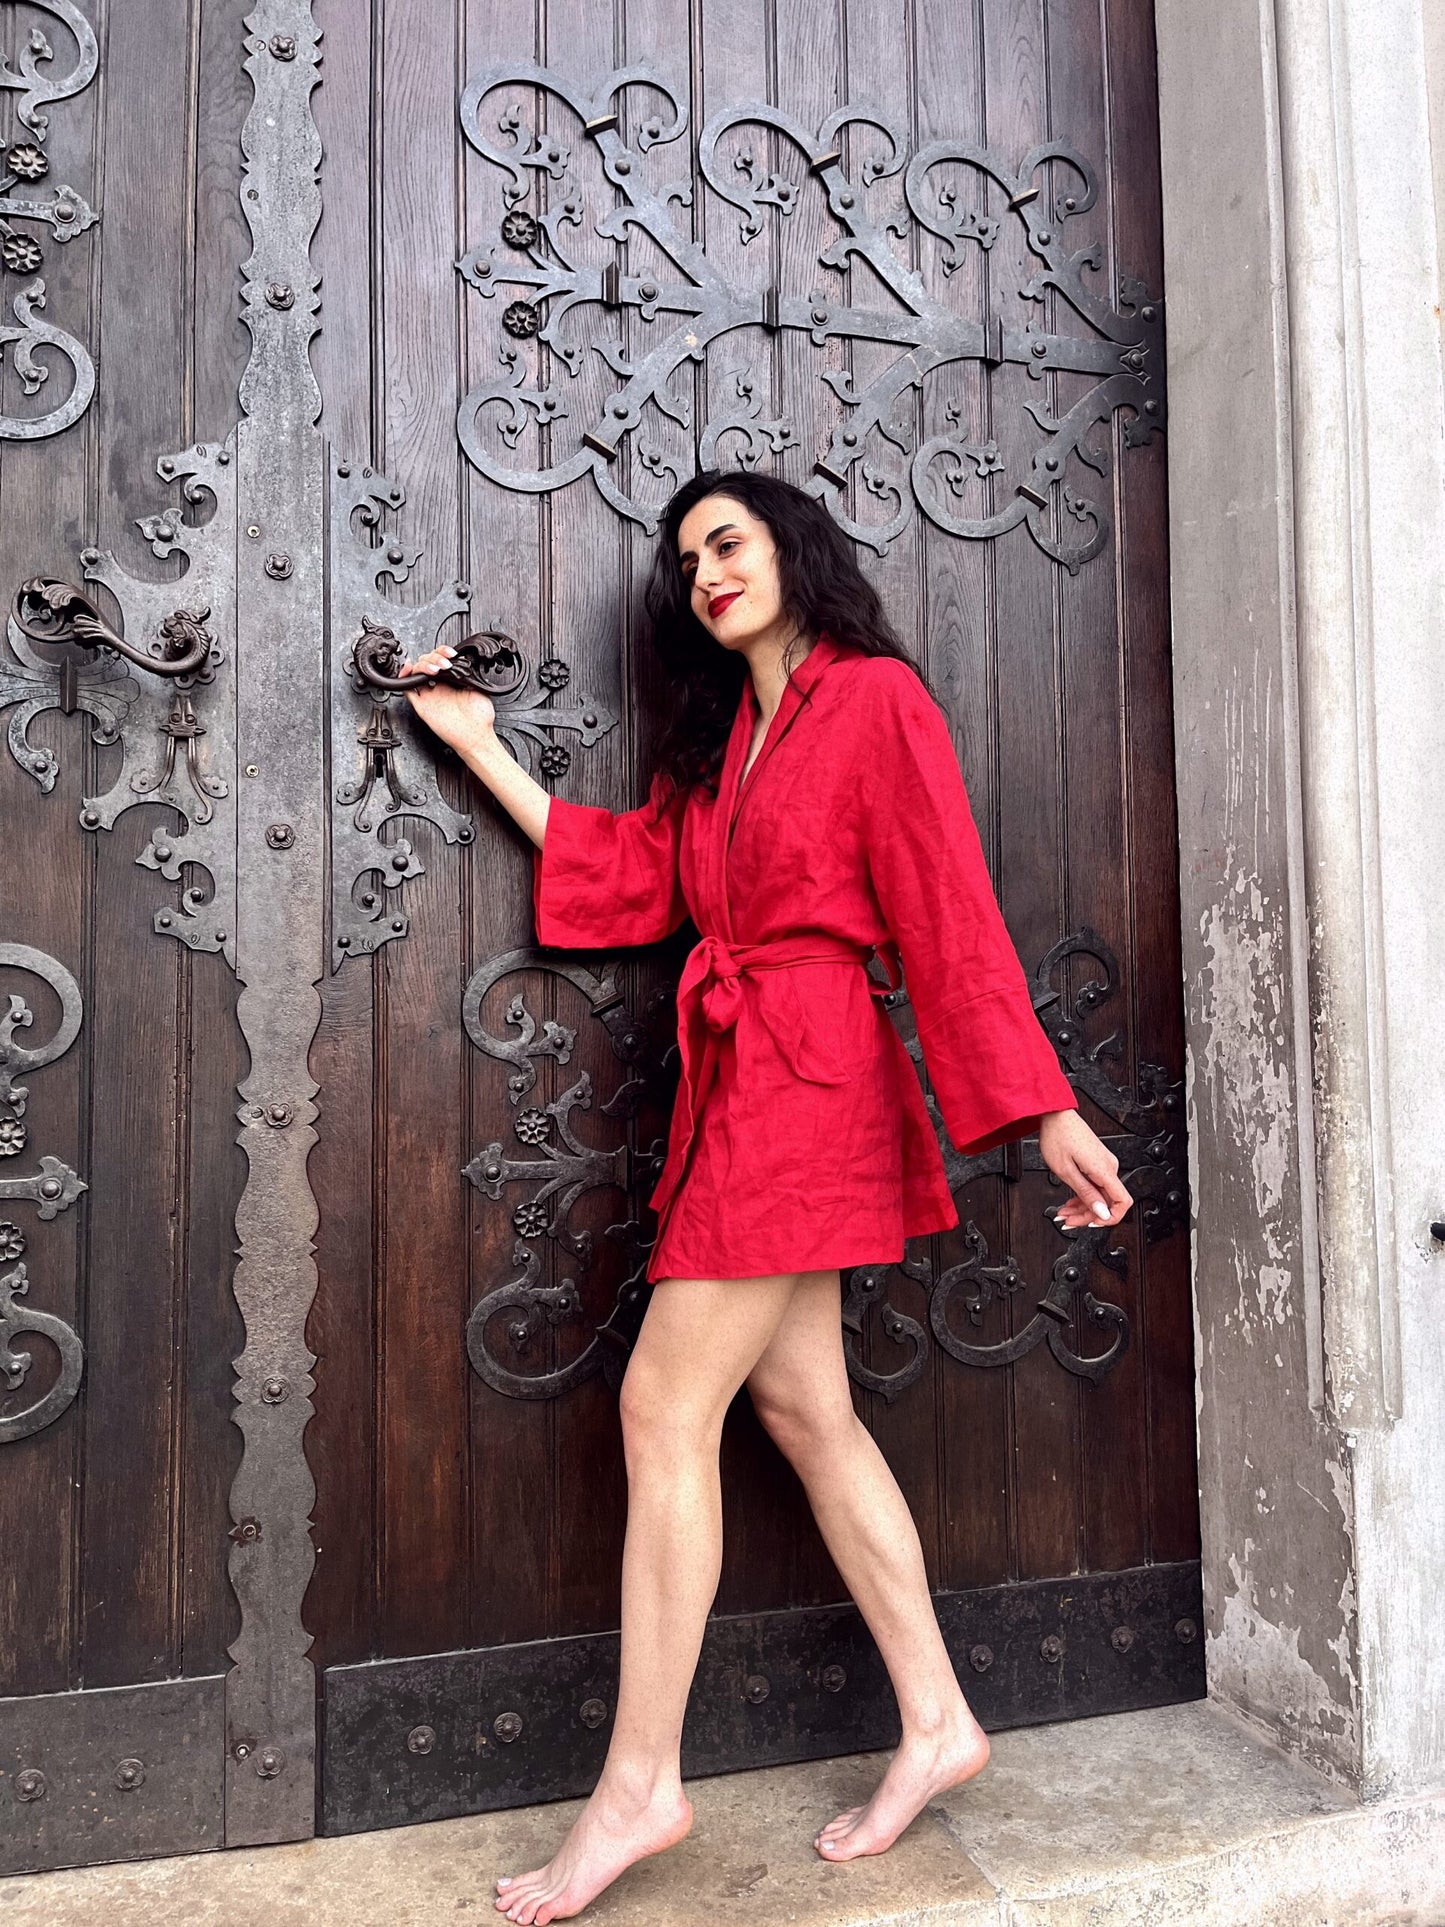 Adorned in a captivating Chery red kimono made of linen, a woman exudes elegance as she stands on steps holding onto a large old fashioned wooden door. Her exquisite clothing is meticulously crafted by a bespoke Linen clothing designer based in South Africa.